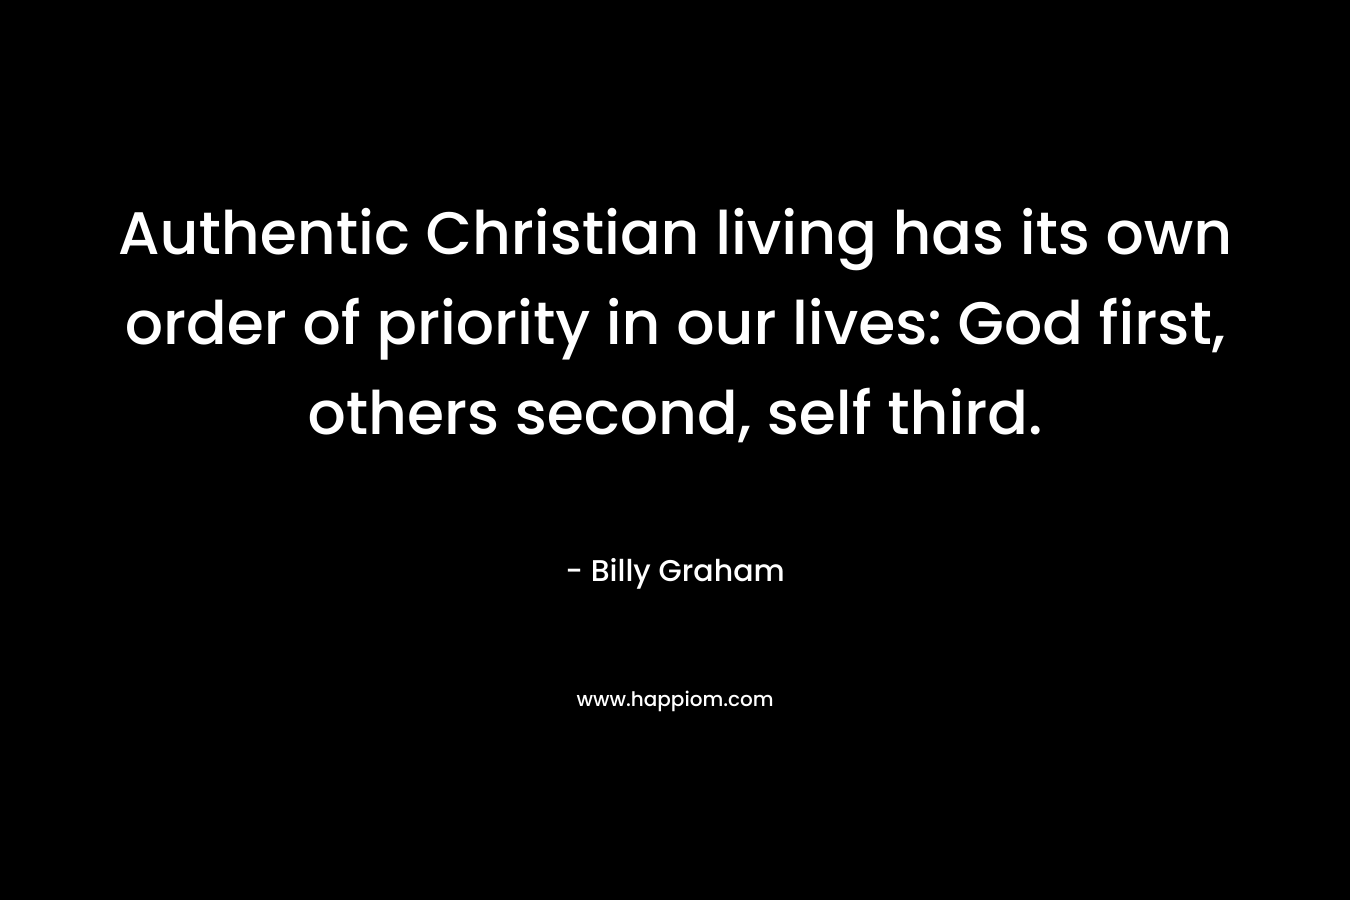 Authentic Christian living has its own order of priority in our lives: God first, others second, self third.